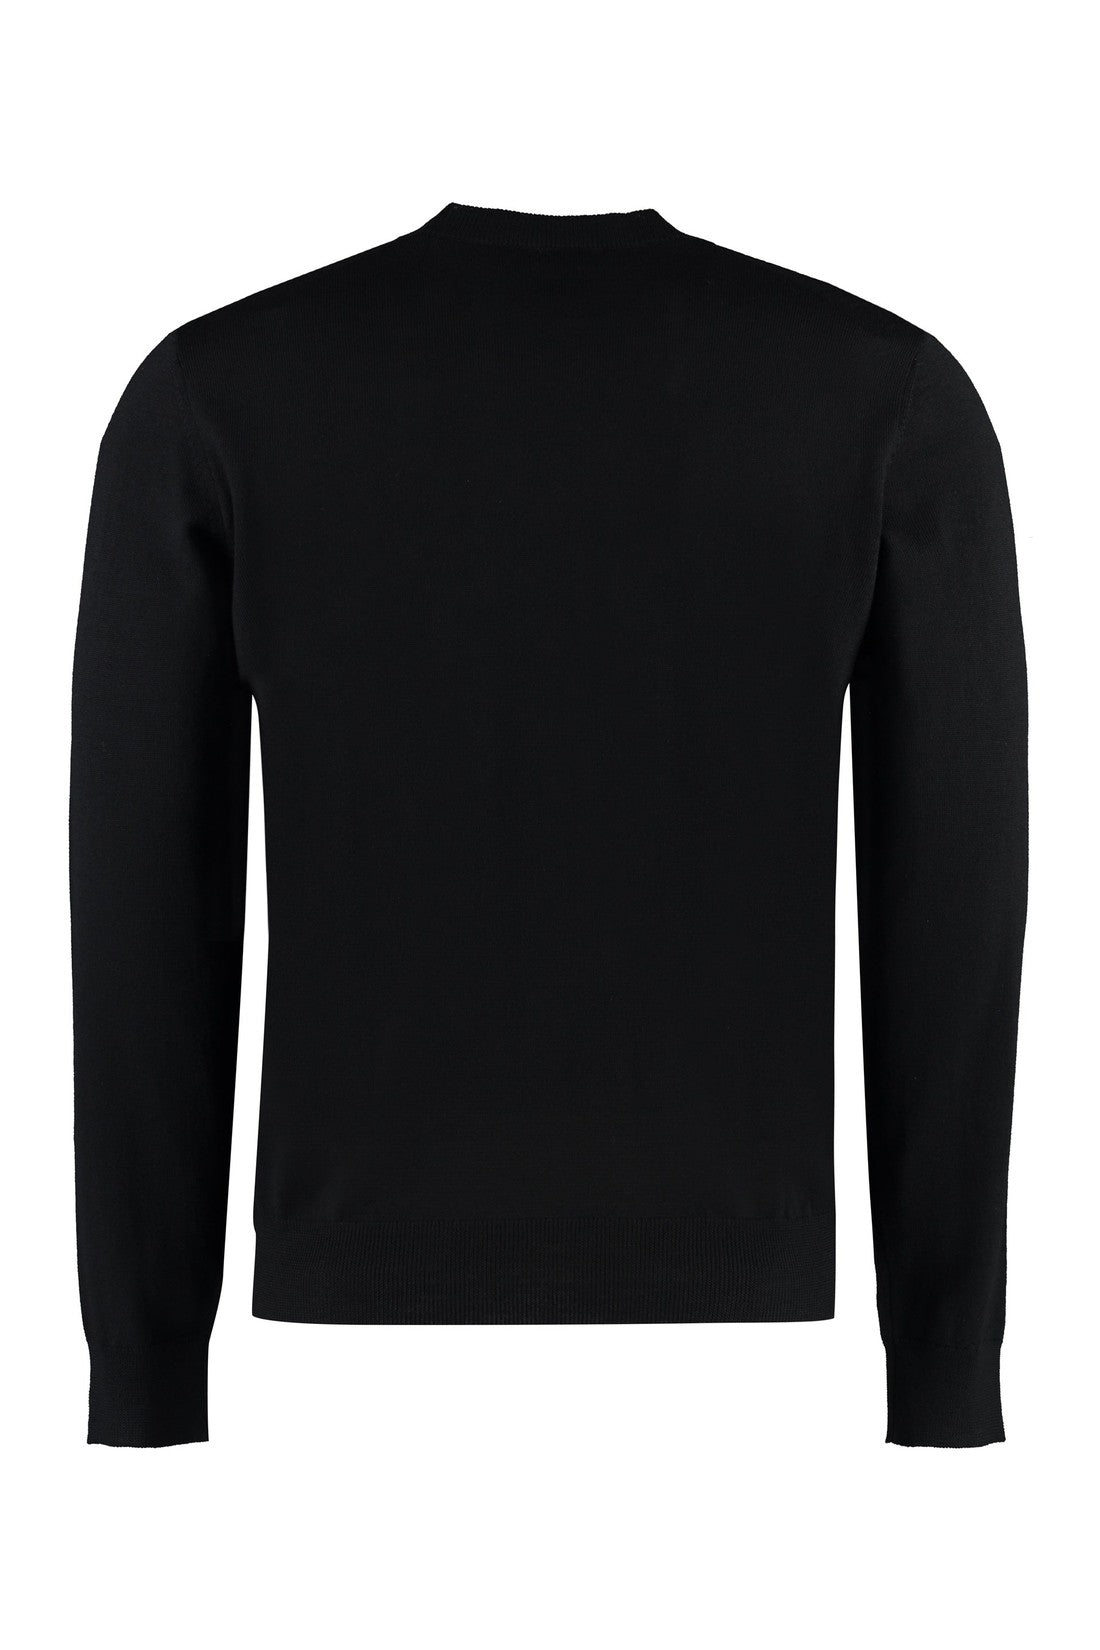 Dsquared2-OUTLET-SALE-Virgin wool crew-neck sweater-ARCHIVIST